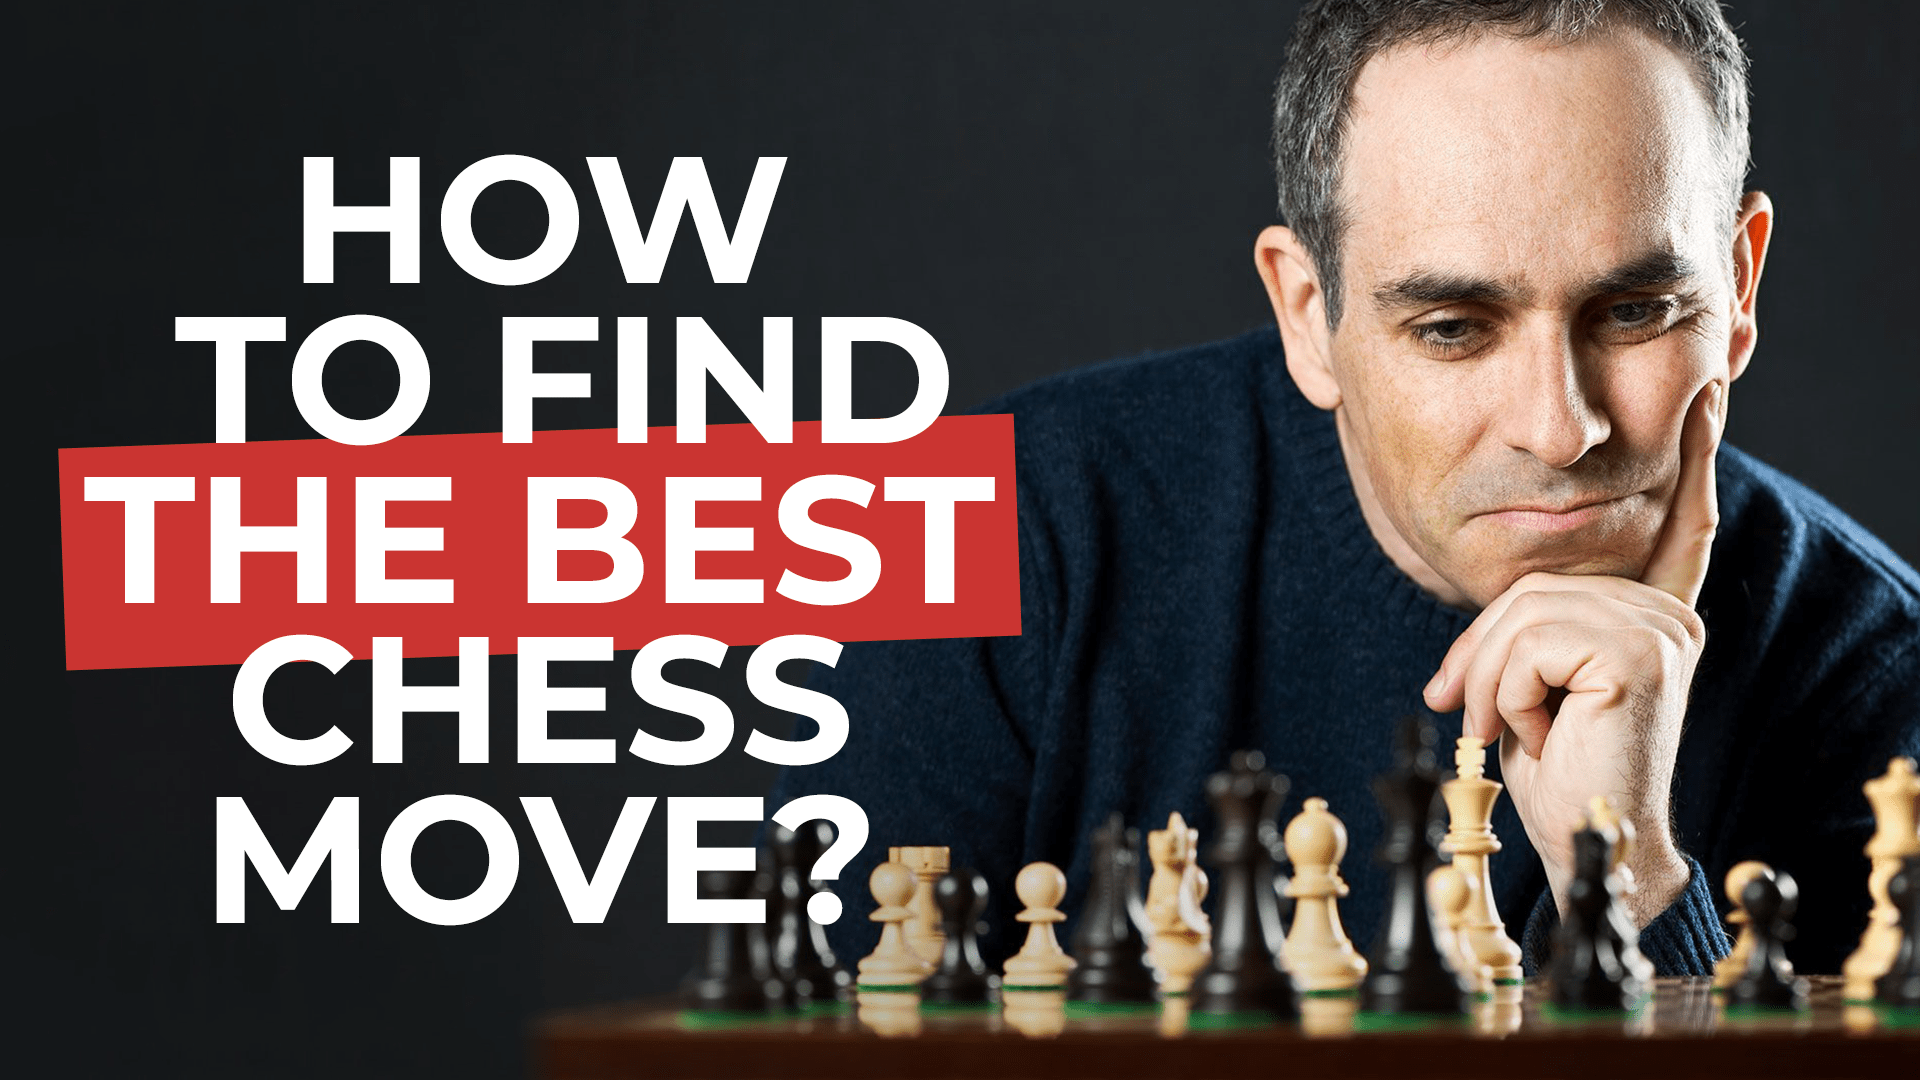 What Is The Best Move? 